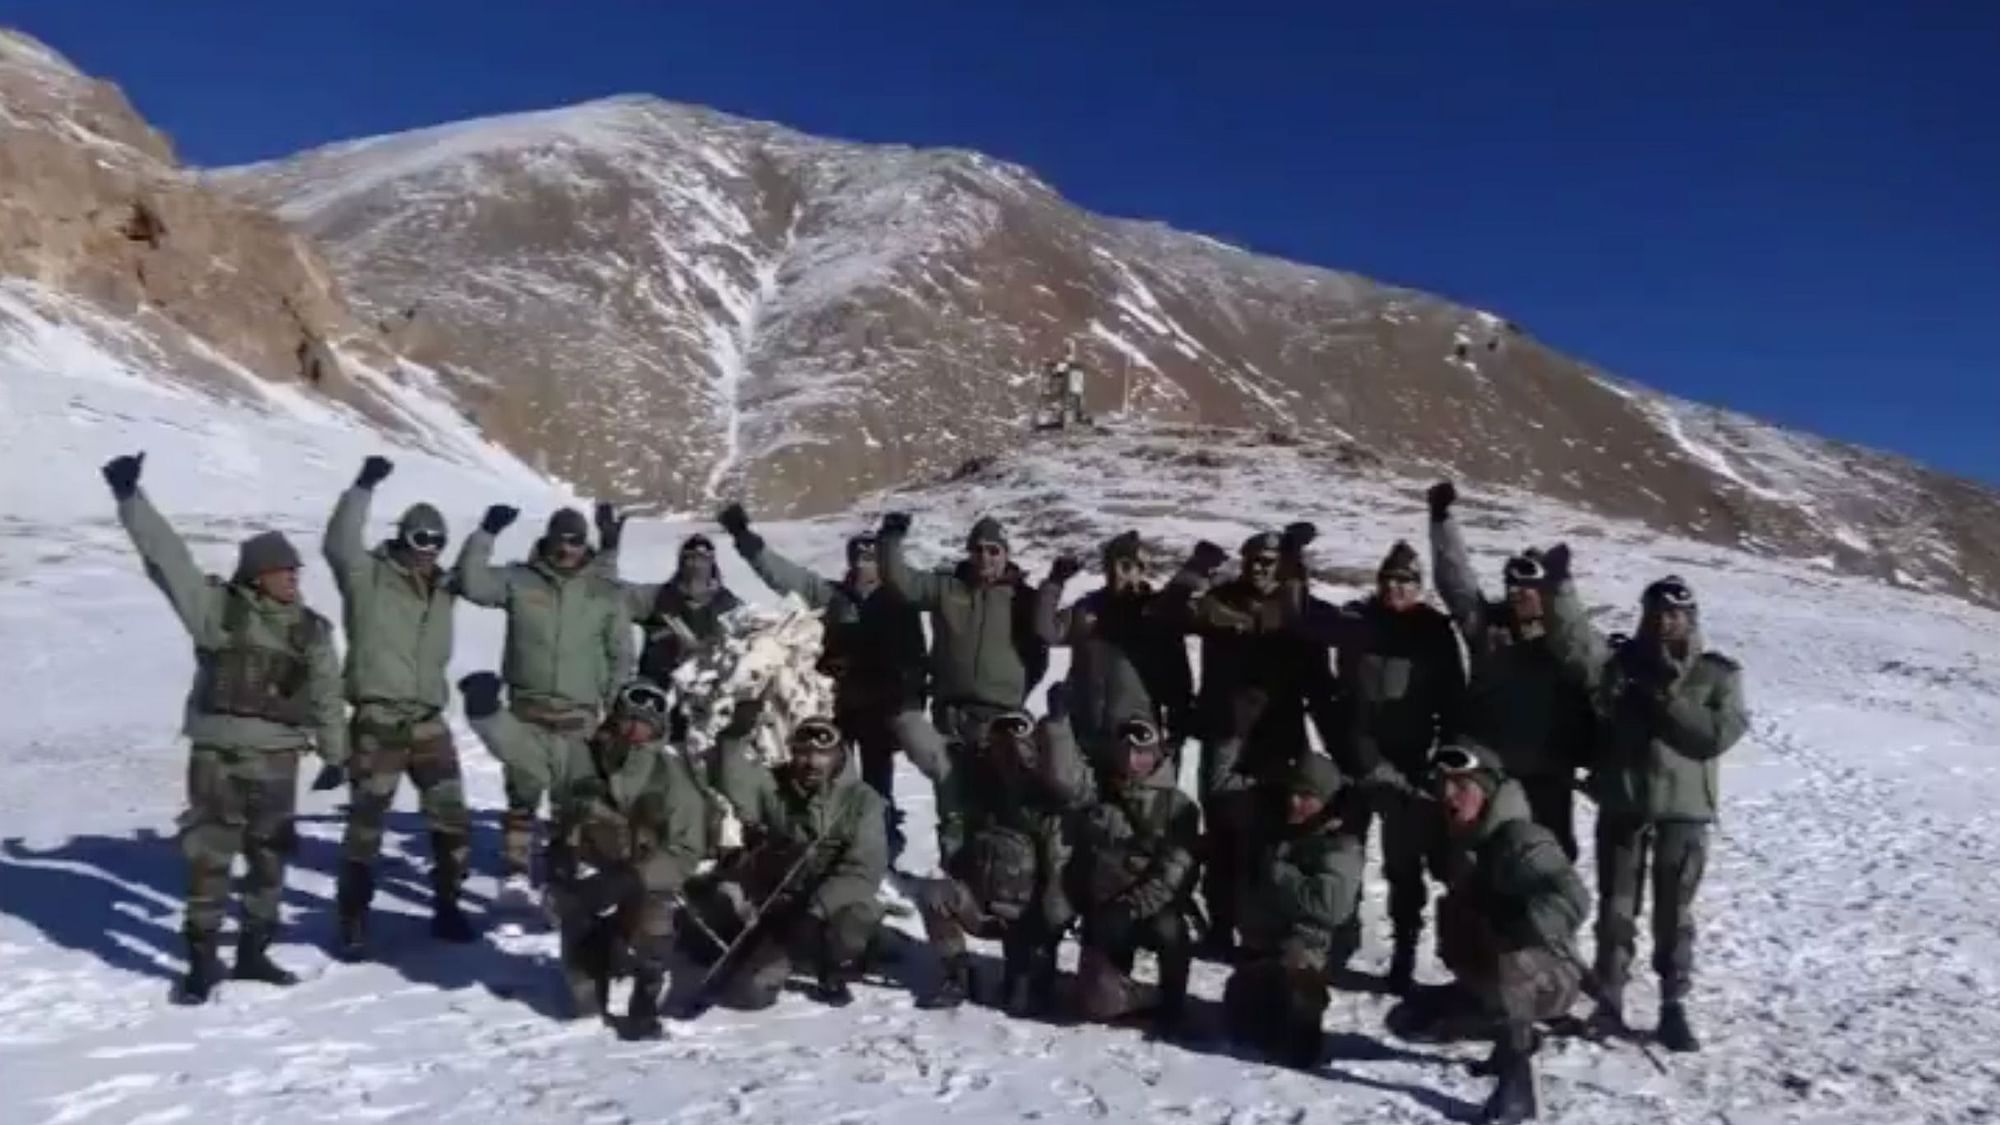 Indian Army shares a 1 minute 57 second video saluting the courage of the soldiers of the Bihar Regiment. 